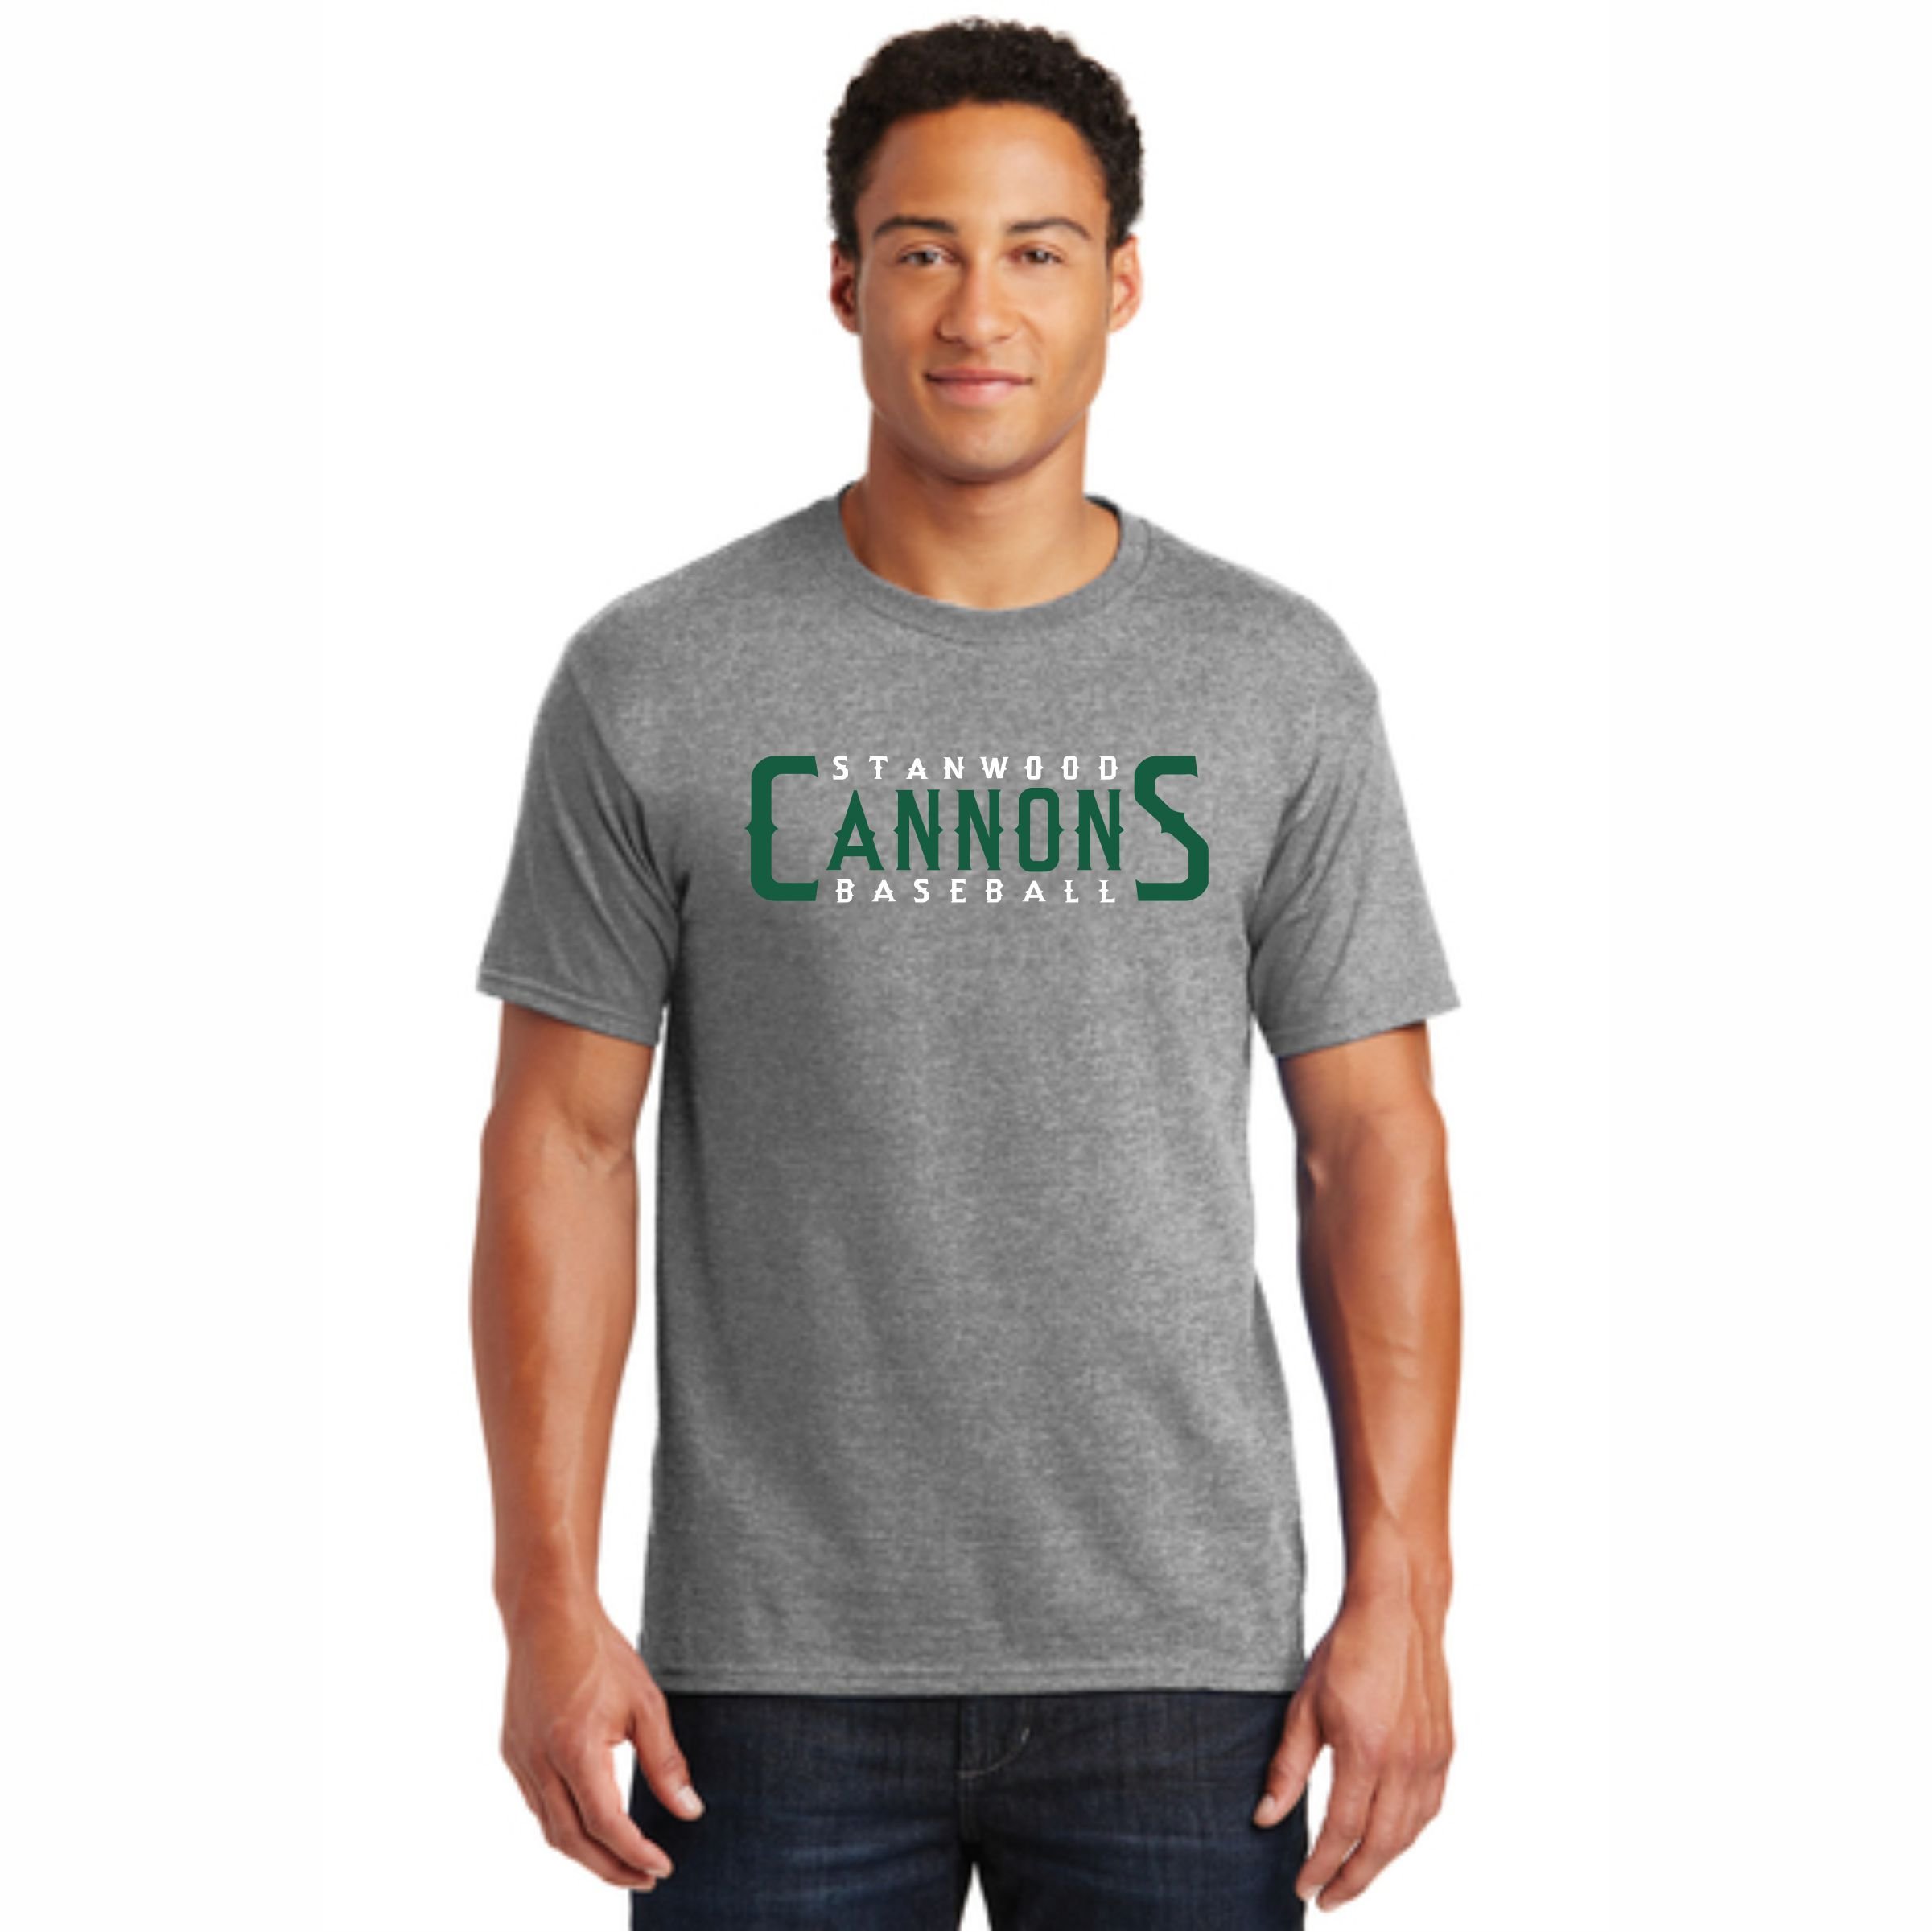 Stanwood Cannons Baseball & Softball Apparel, Hats and Accessories ...